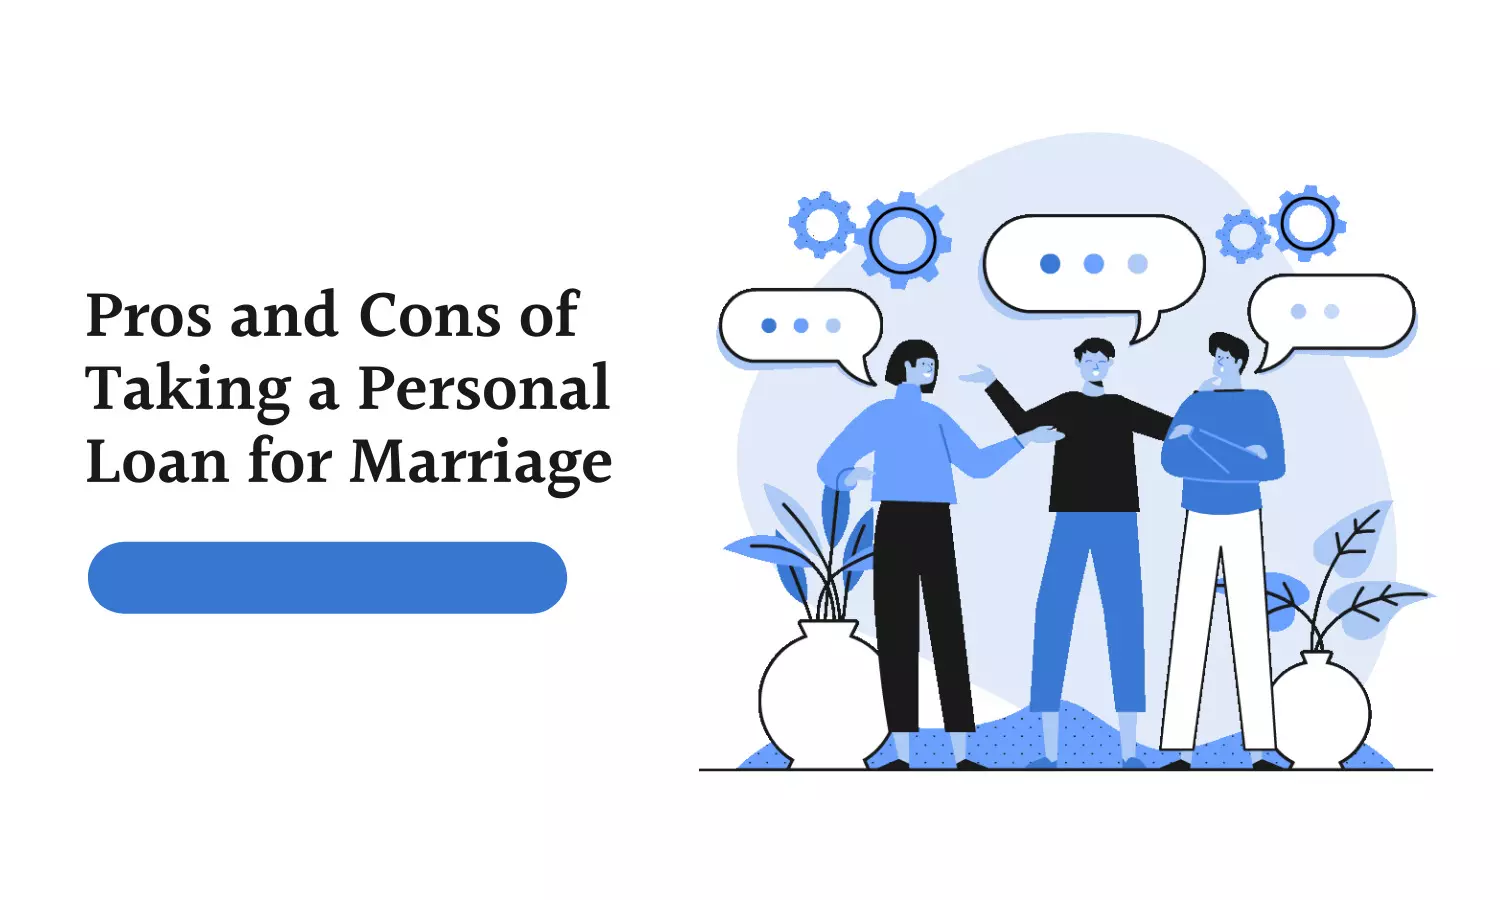 Pros and Cons of Taking a Personal Loan for Marriage